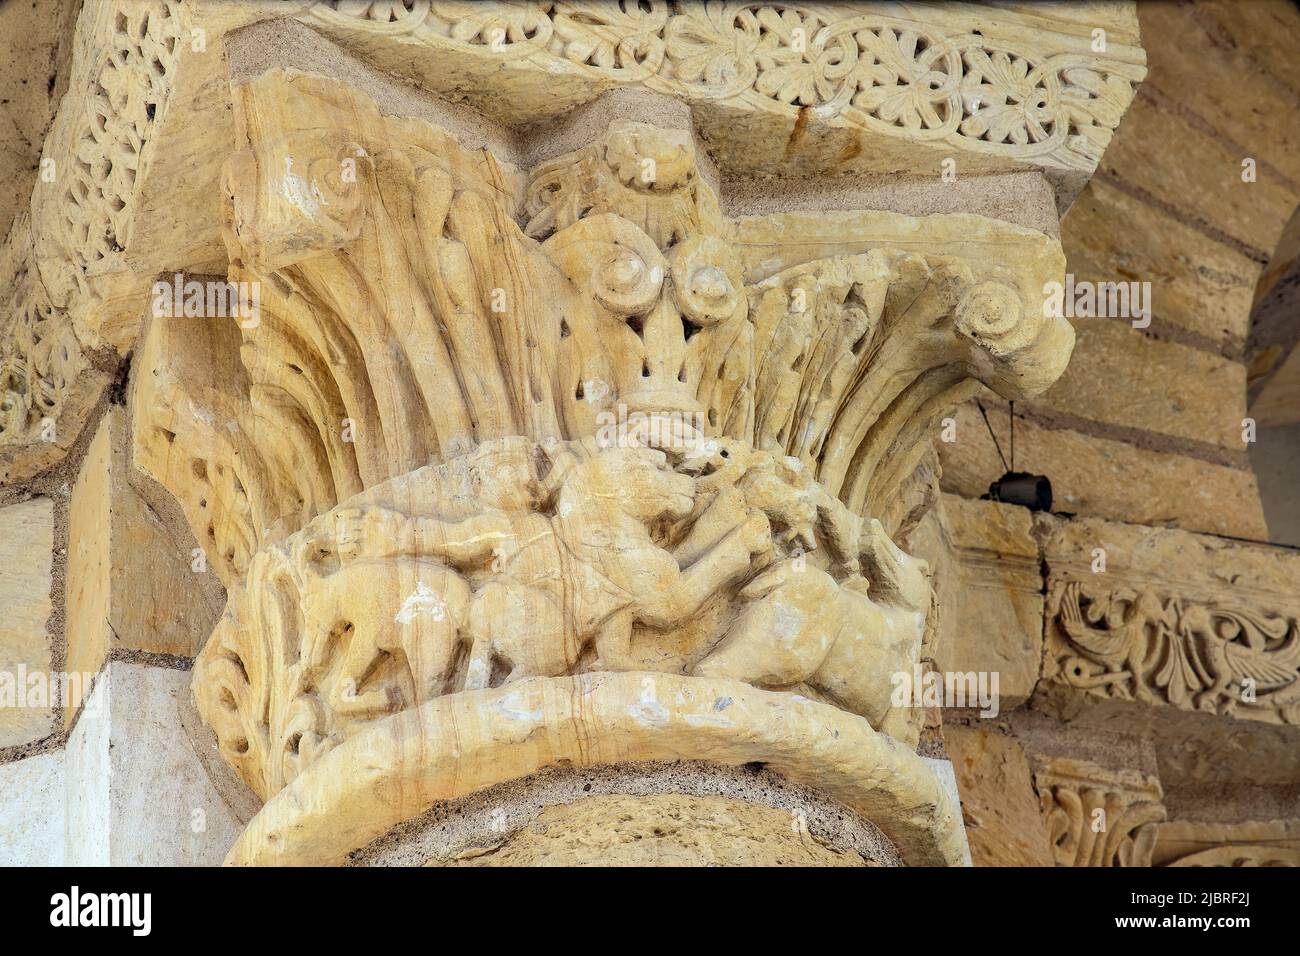 Carved capitals in the Romanesque Abbey Church of St Benoit sur Loire (Abbaye de Fleury). Loiret department in north-central France. Stock Photo